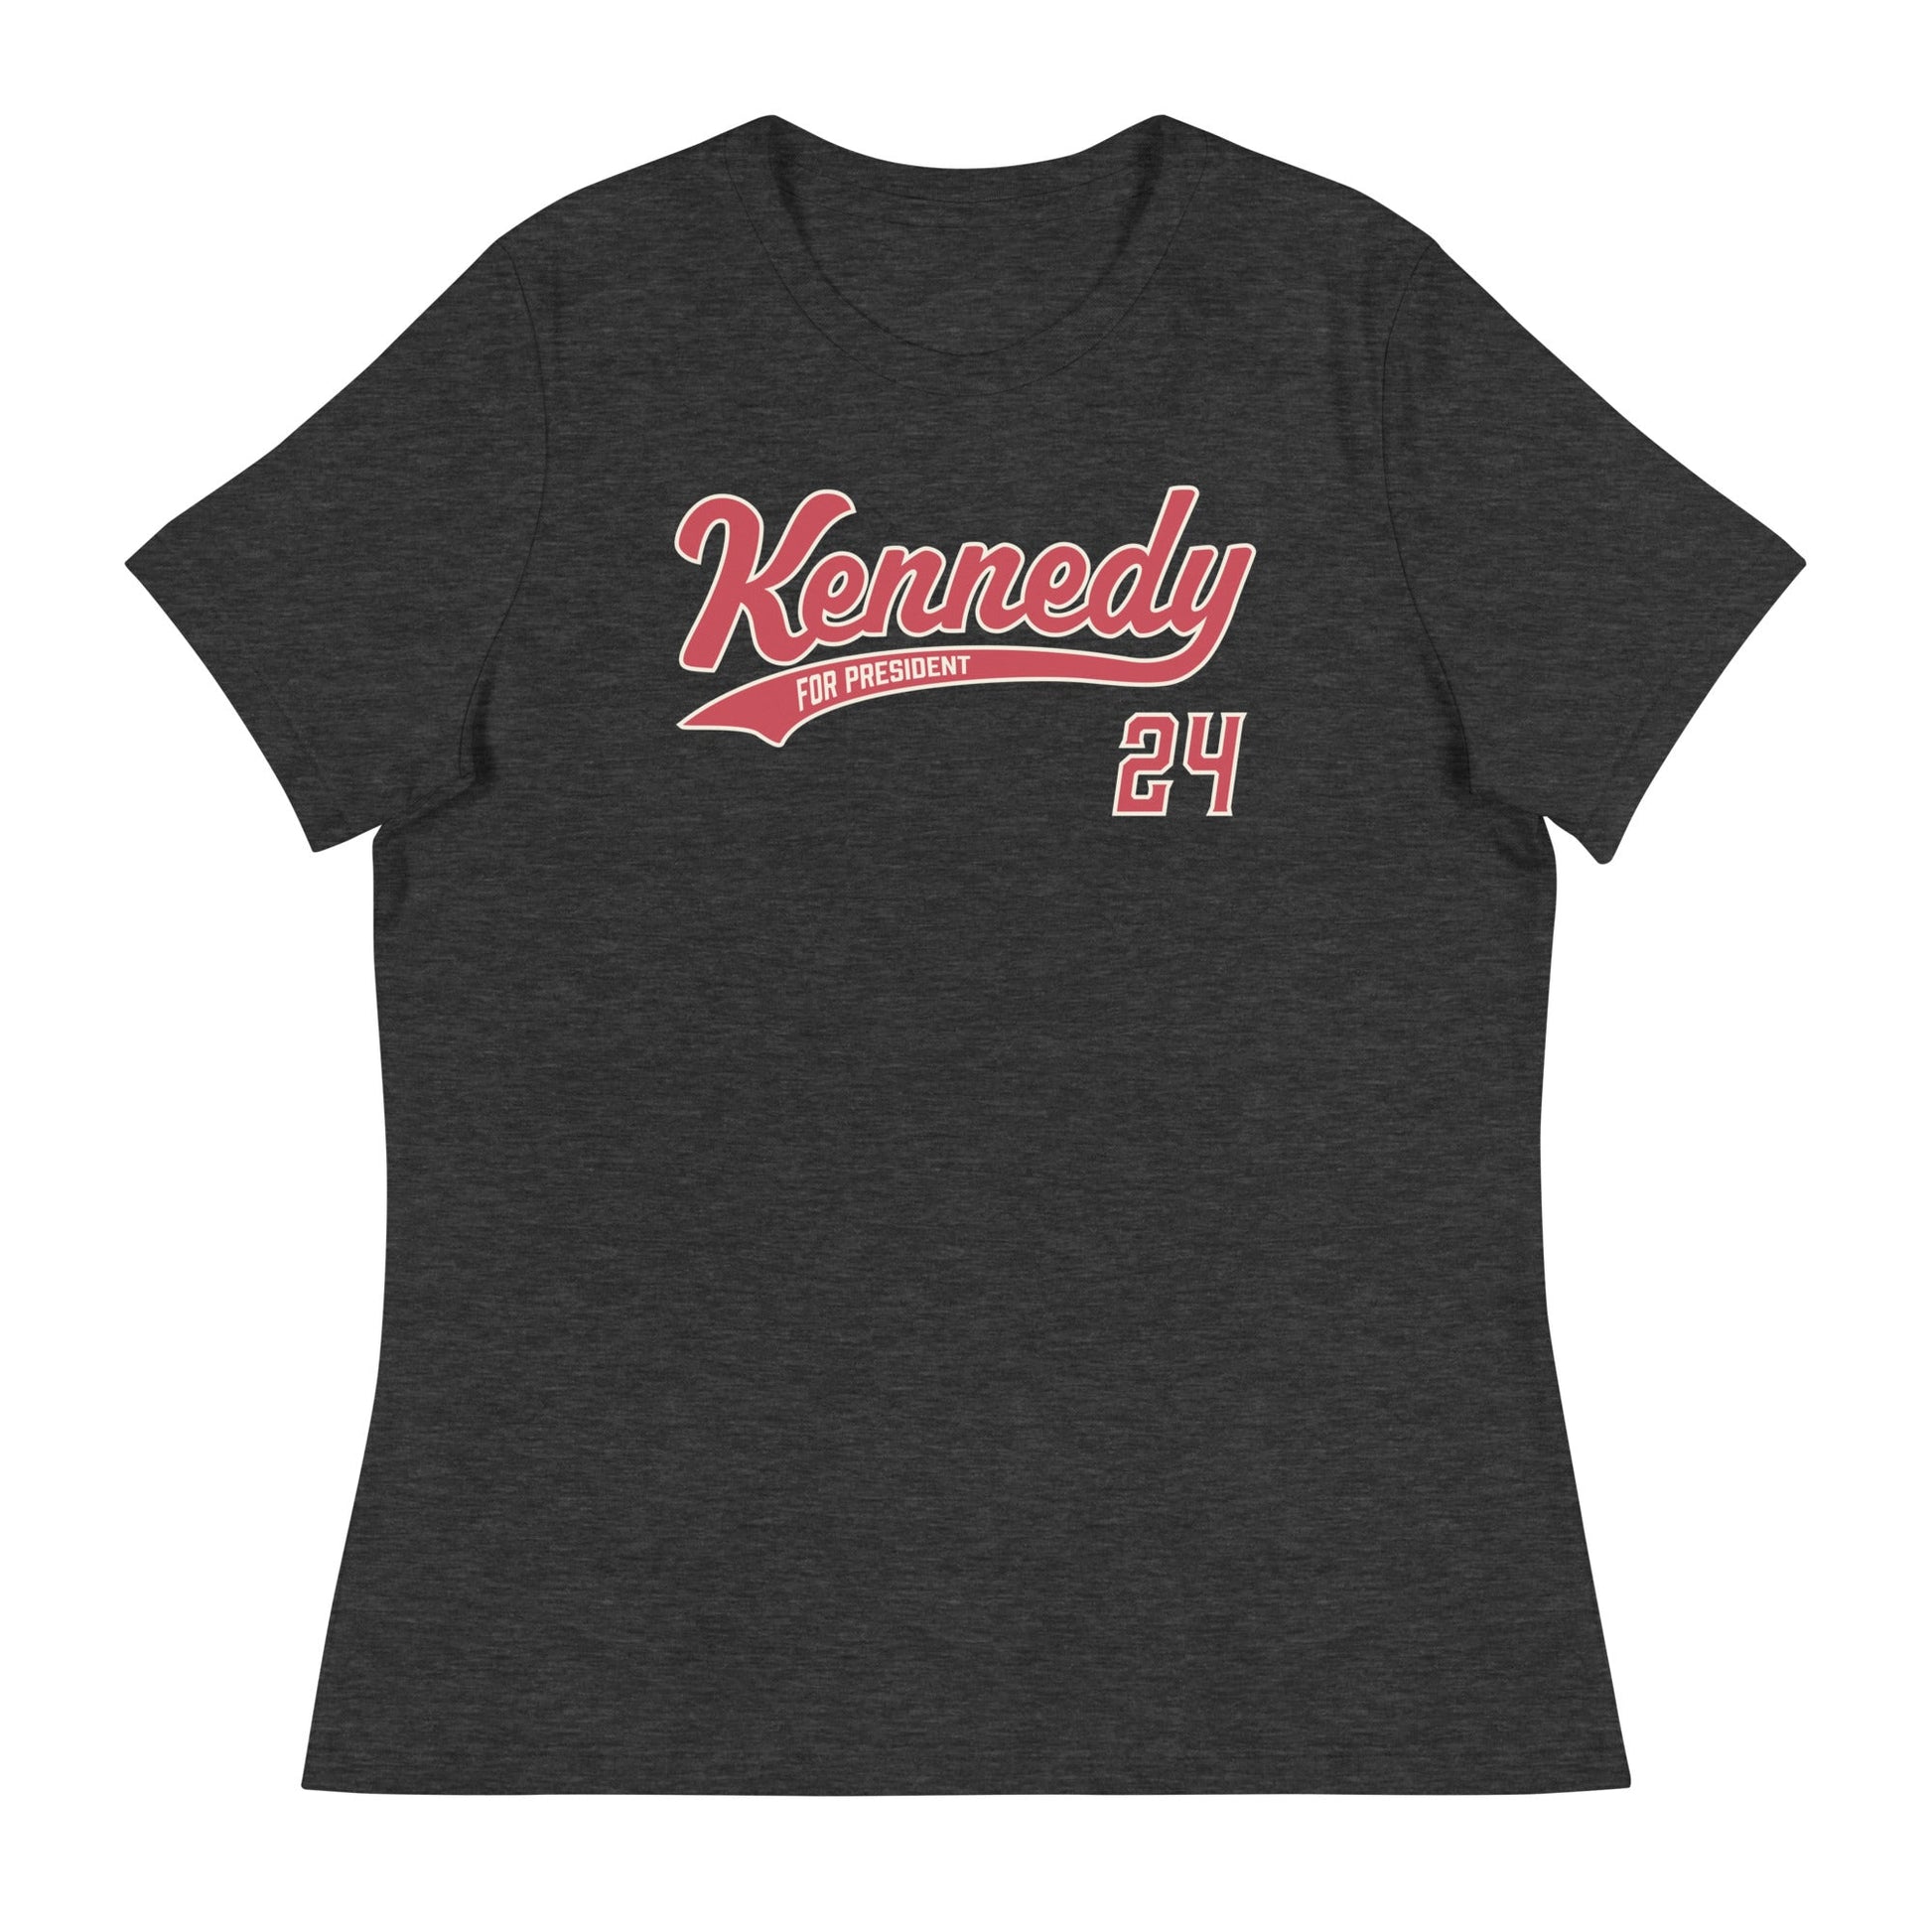 Kennedy Baseball Women's Relaxed Tee - TEAM KENNEDY. All rights reserved